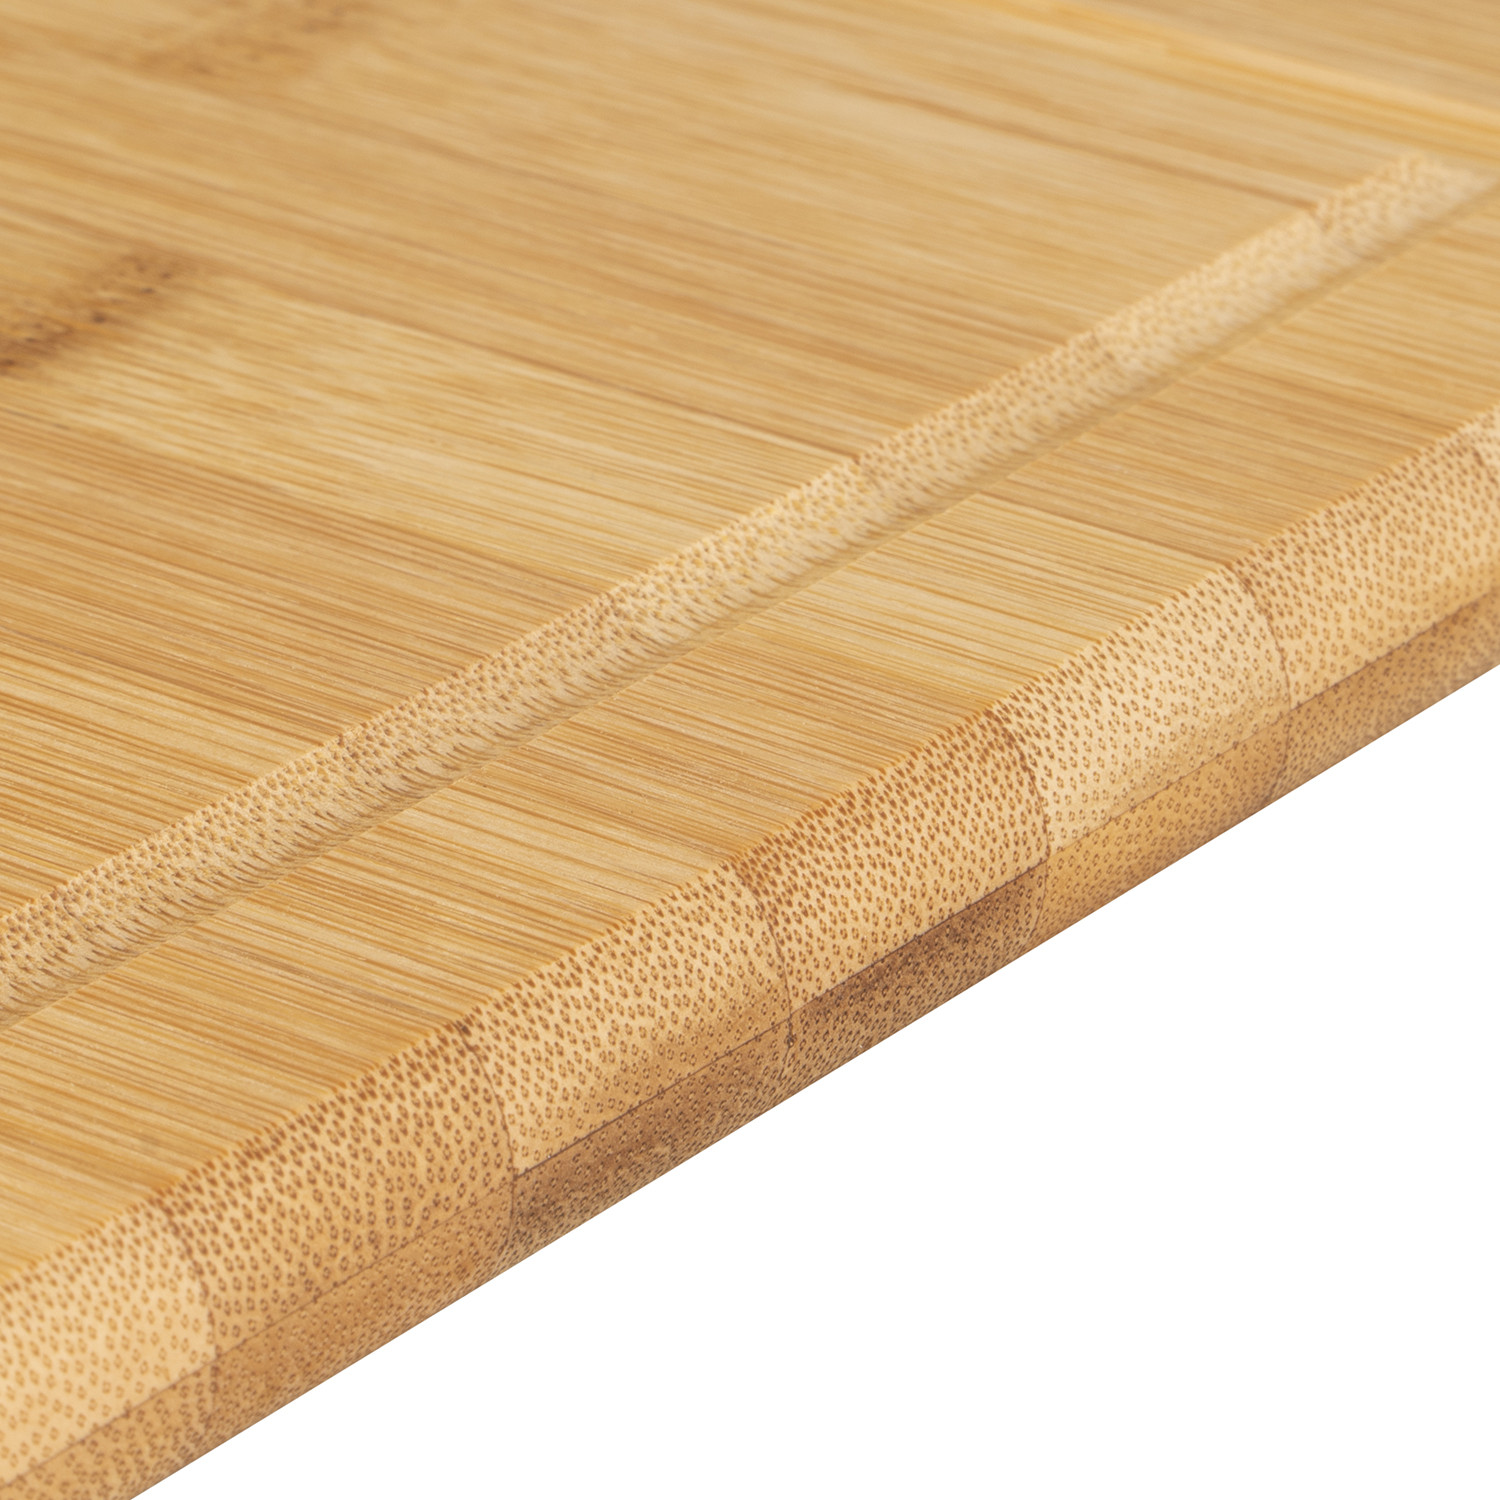 Medium Bamboo Chopping Board with Wire Handle Image 3